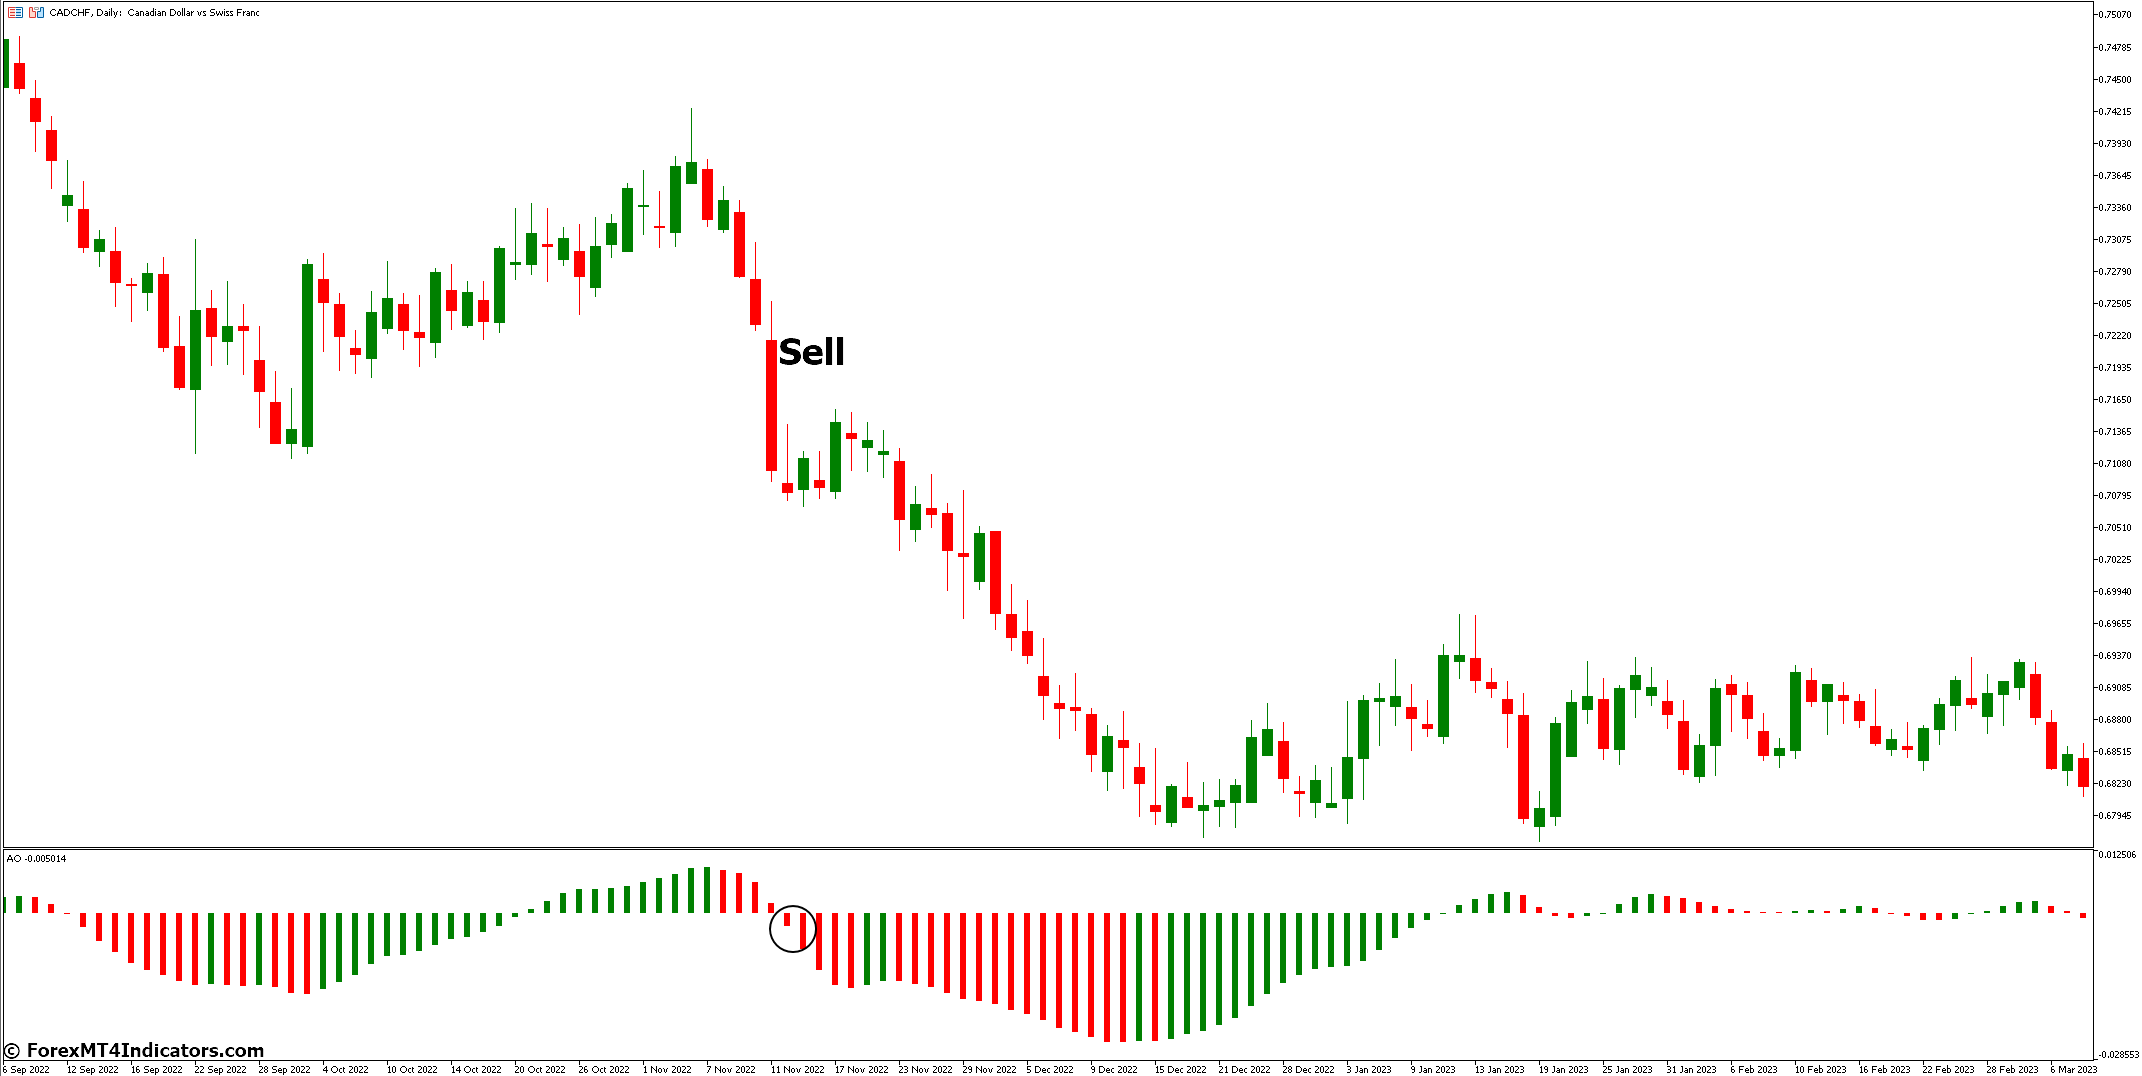 How to Trade with Awesome Oscillator MT5 Indicator - Sell Entry